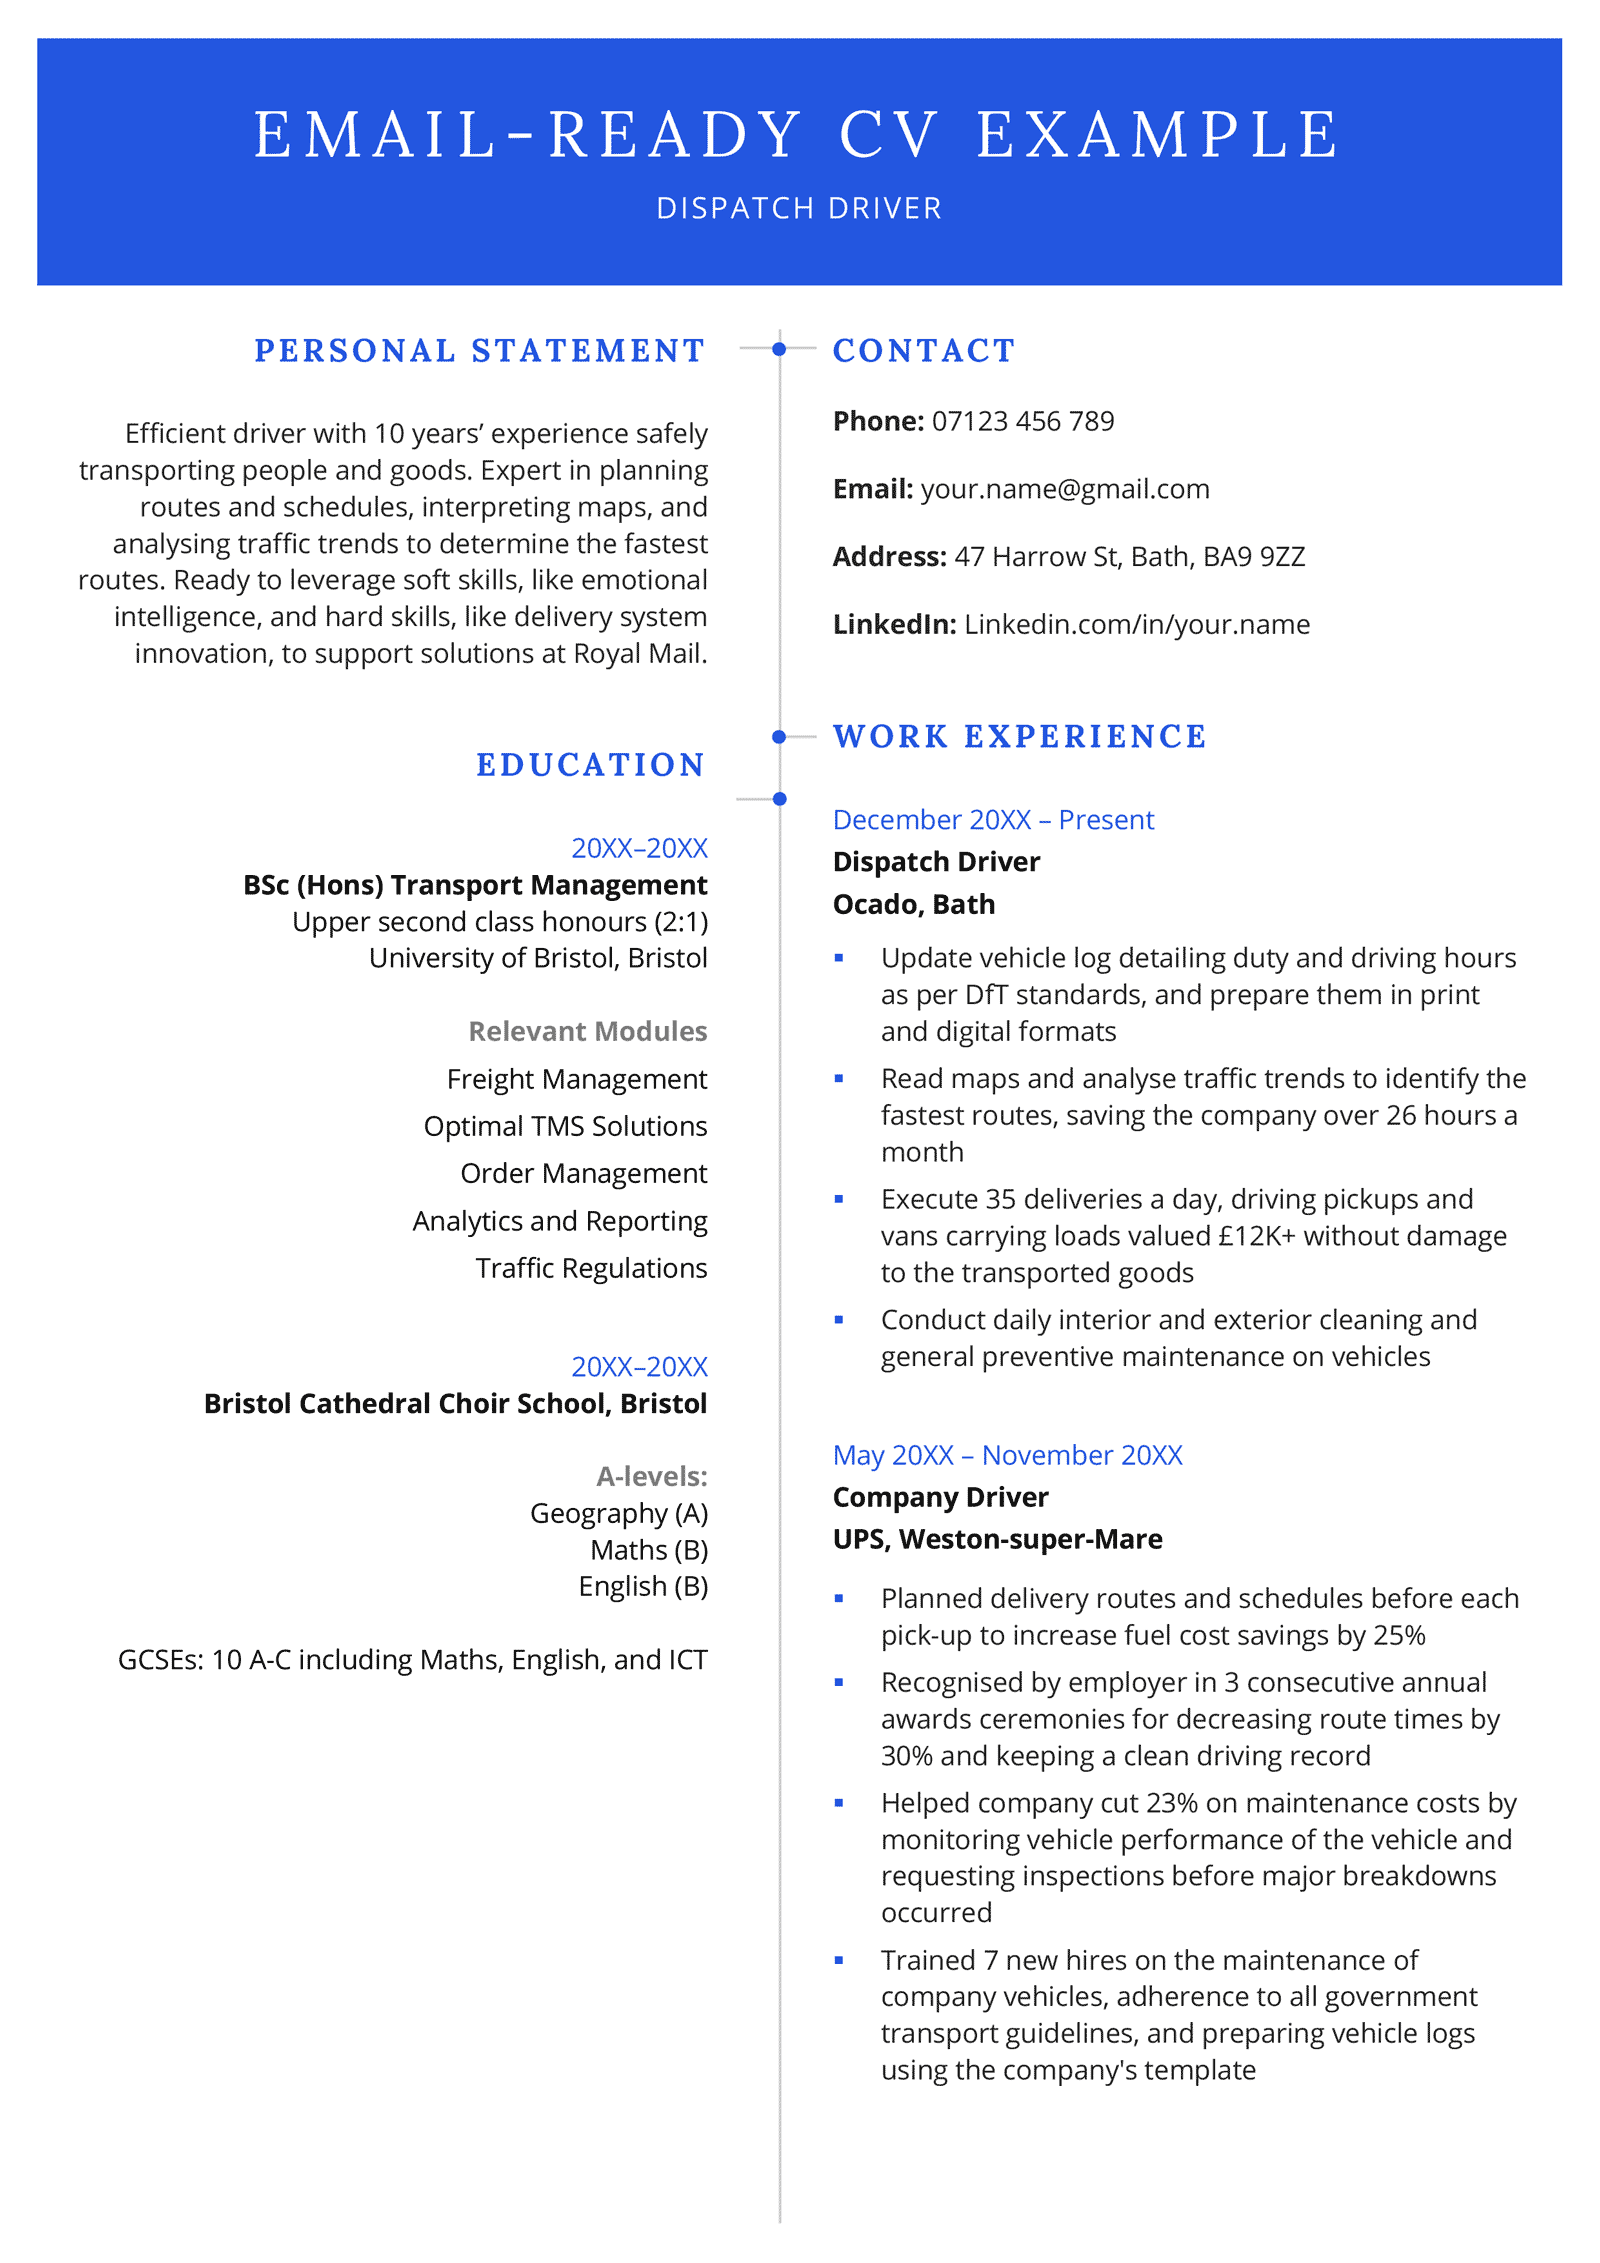 An example of a CV ready to be sent by email to an employer that uses a blue colour scheme and a two-column design.